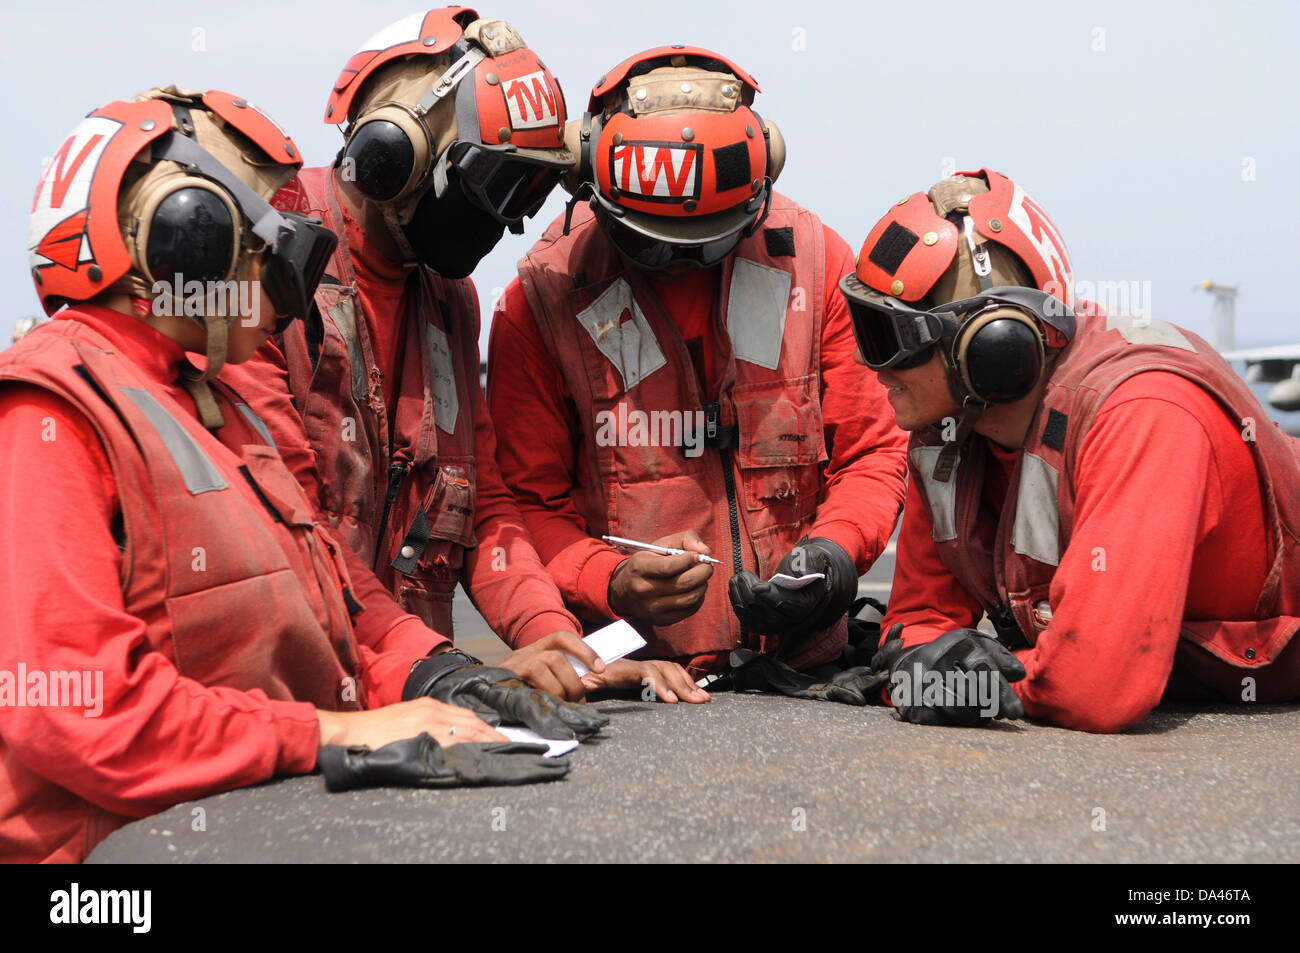 US Navy aviation ordnance men debrief after loading aircraft weapons during flight operations aboard the aircraft carrier USS Nimitz June 19, 2013 in the Gulf of Oman. Stock Photo